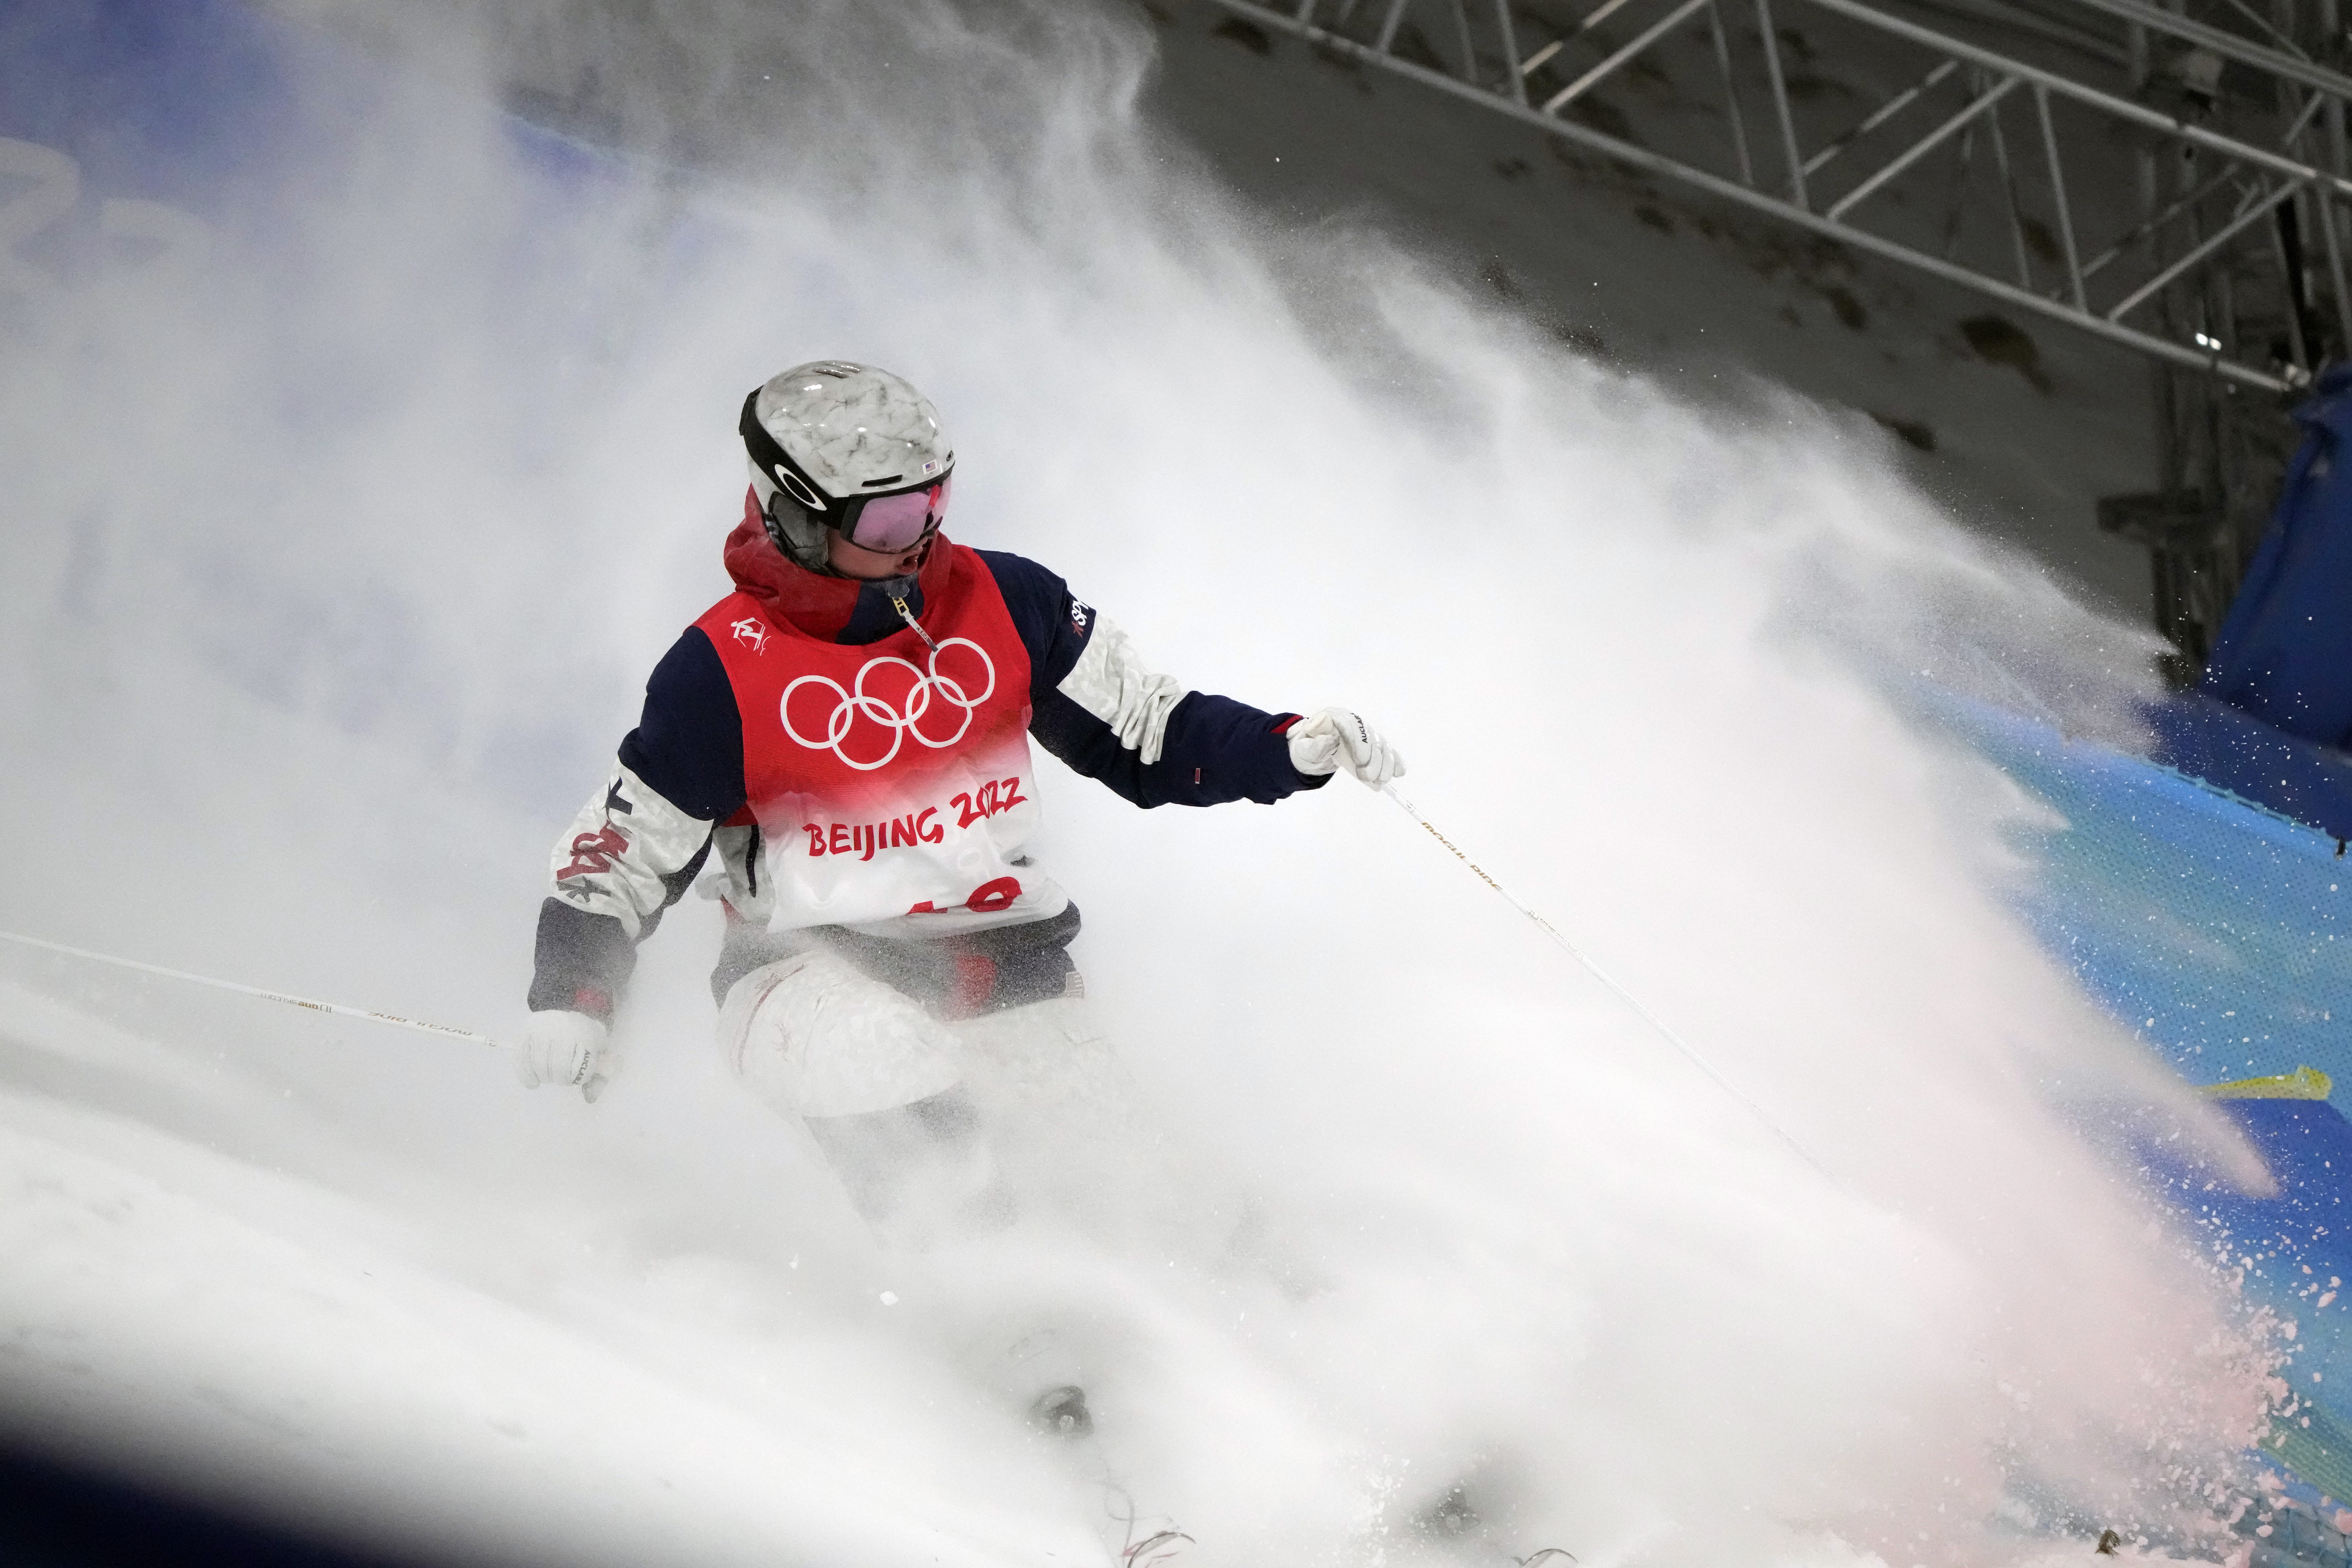 Winter Olympics 2022 opening ceremony live stream How to watch, time, channel